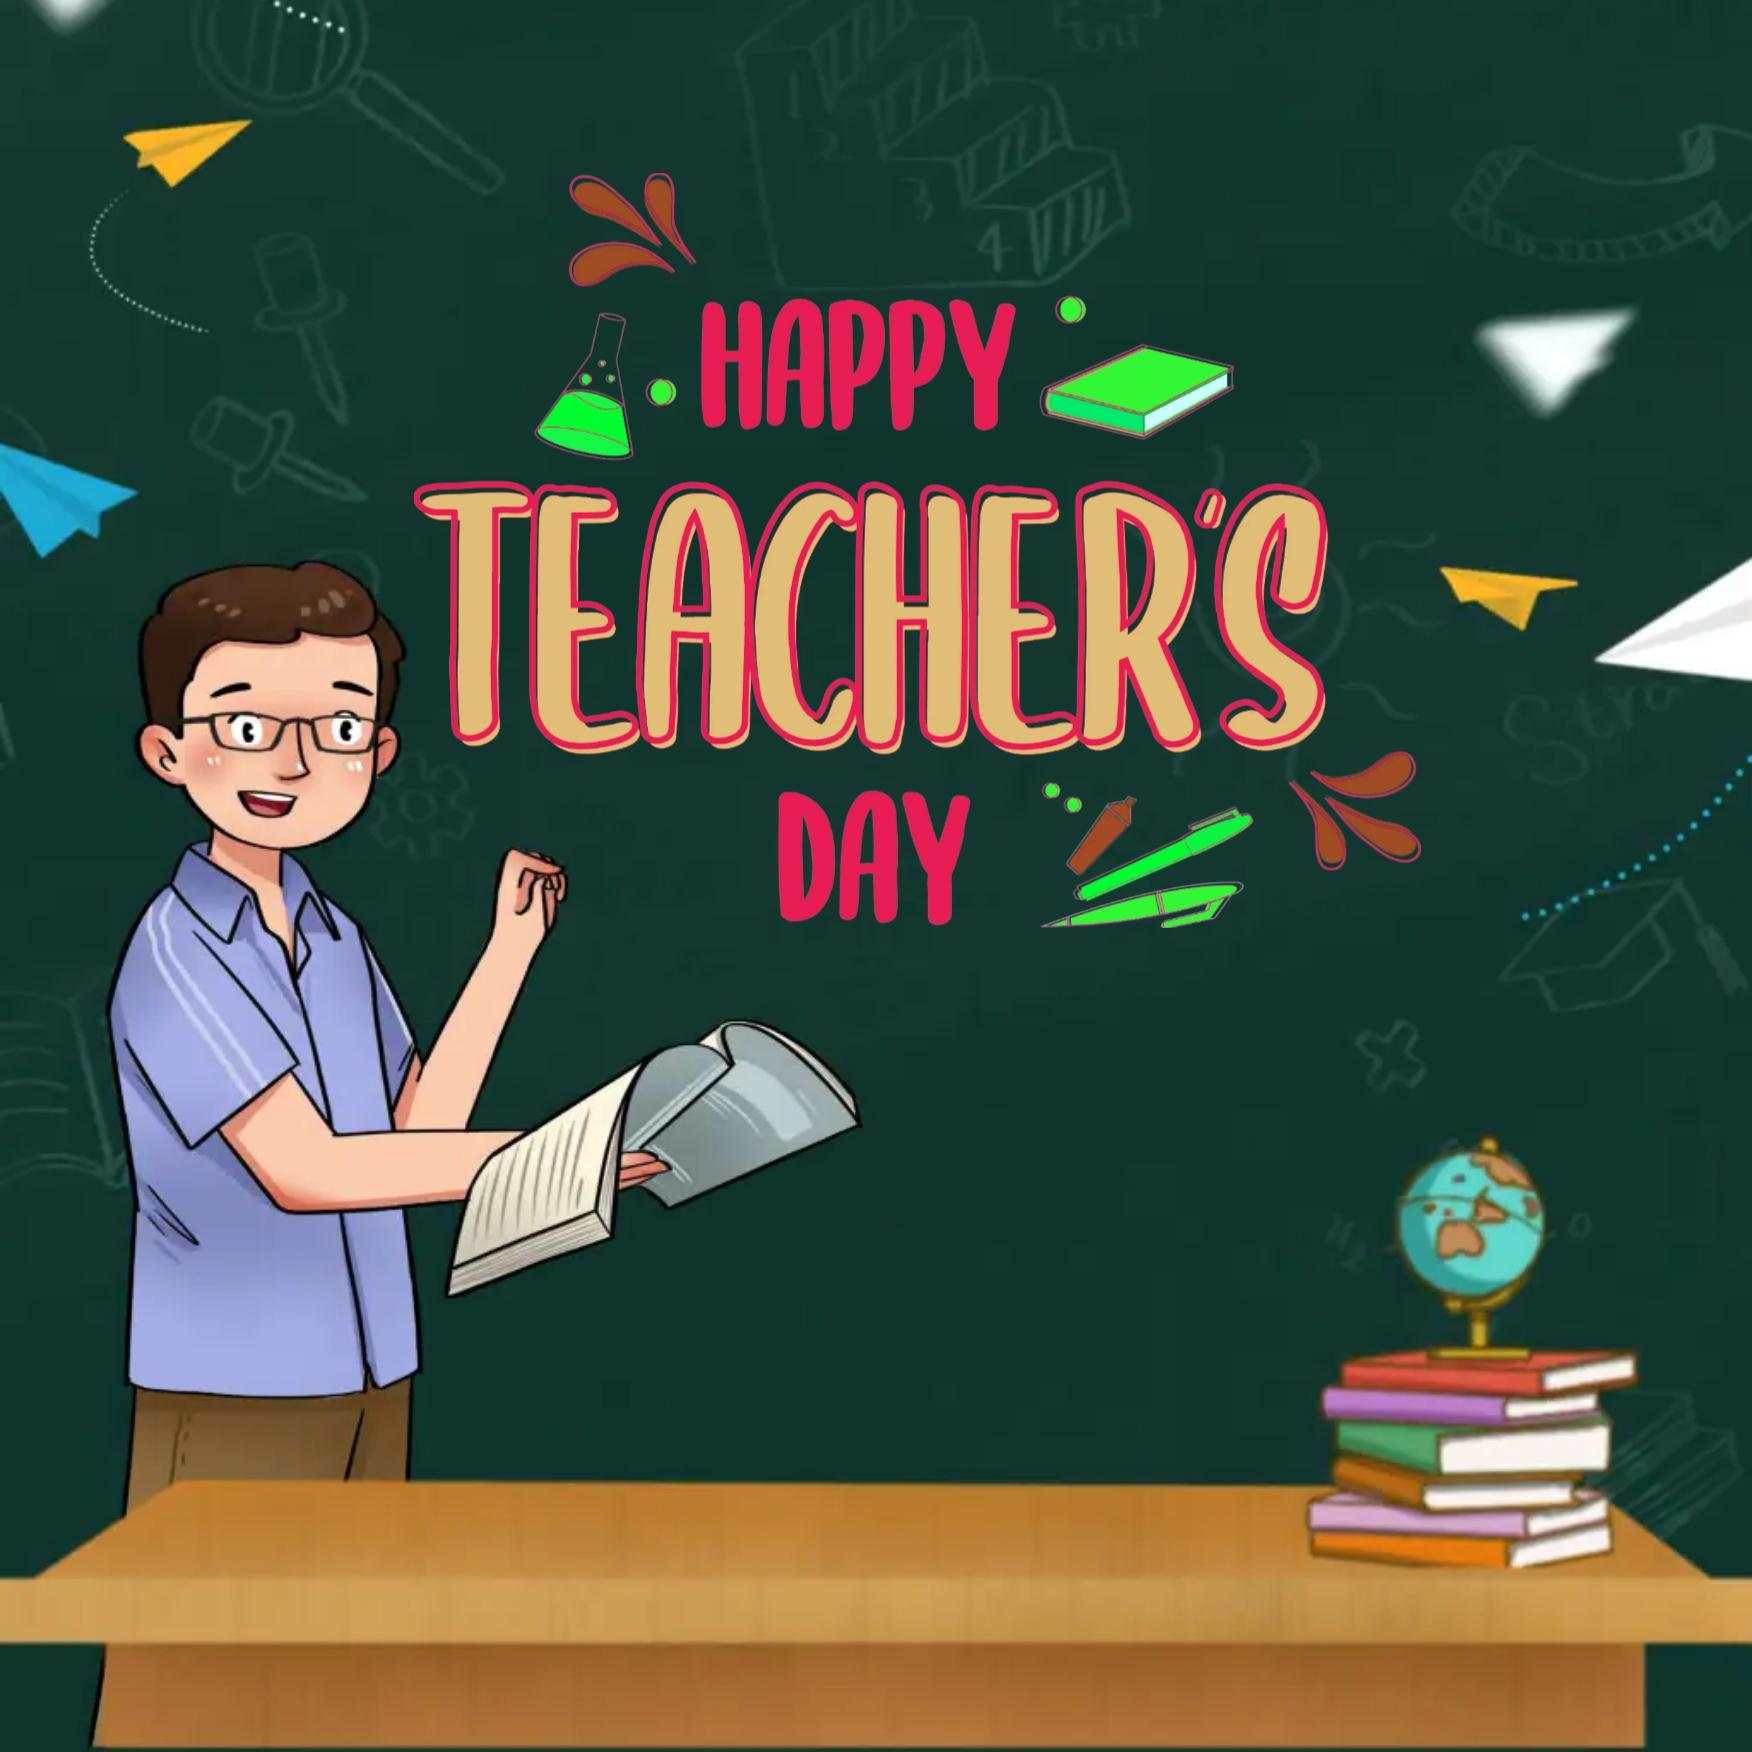 Teachers Day Greeting Cards Images